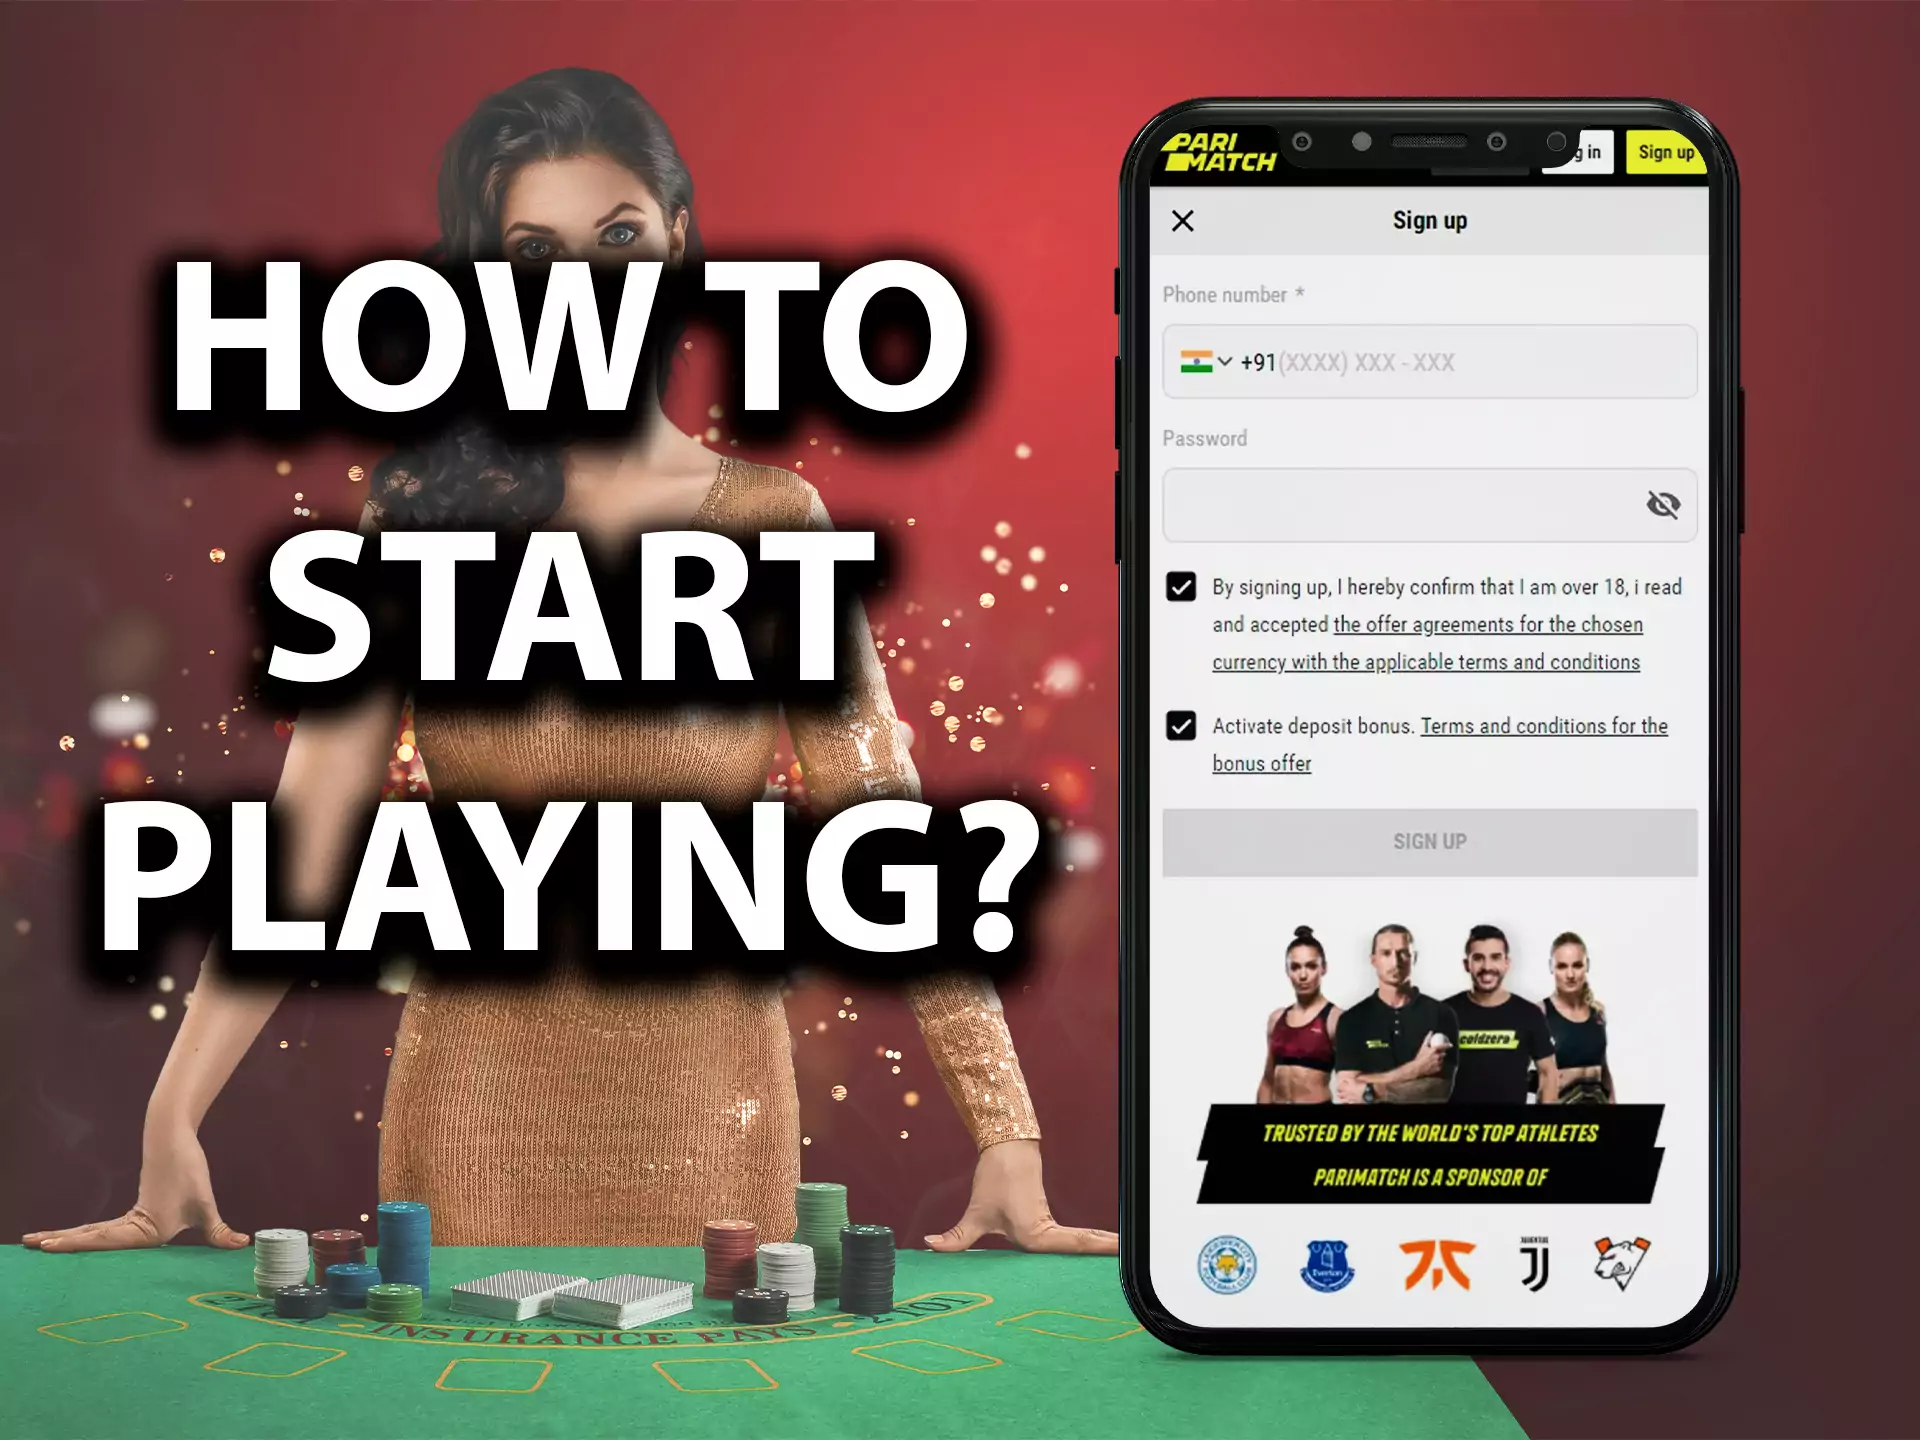 There are three simple steps to start playing at an online casino.